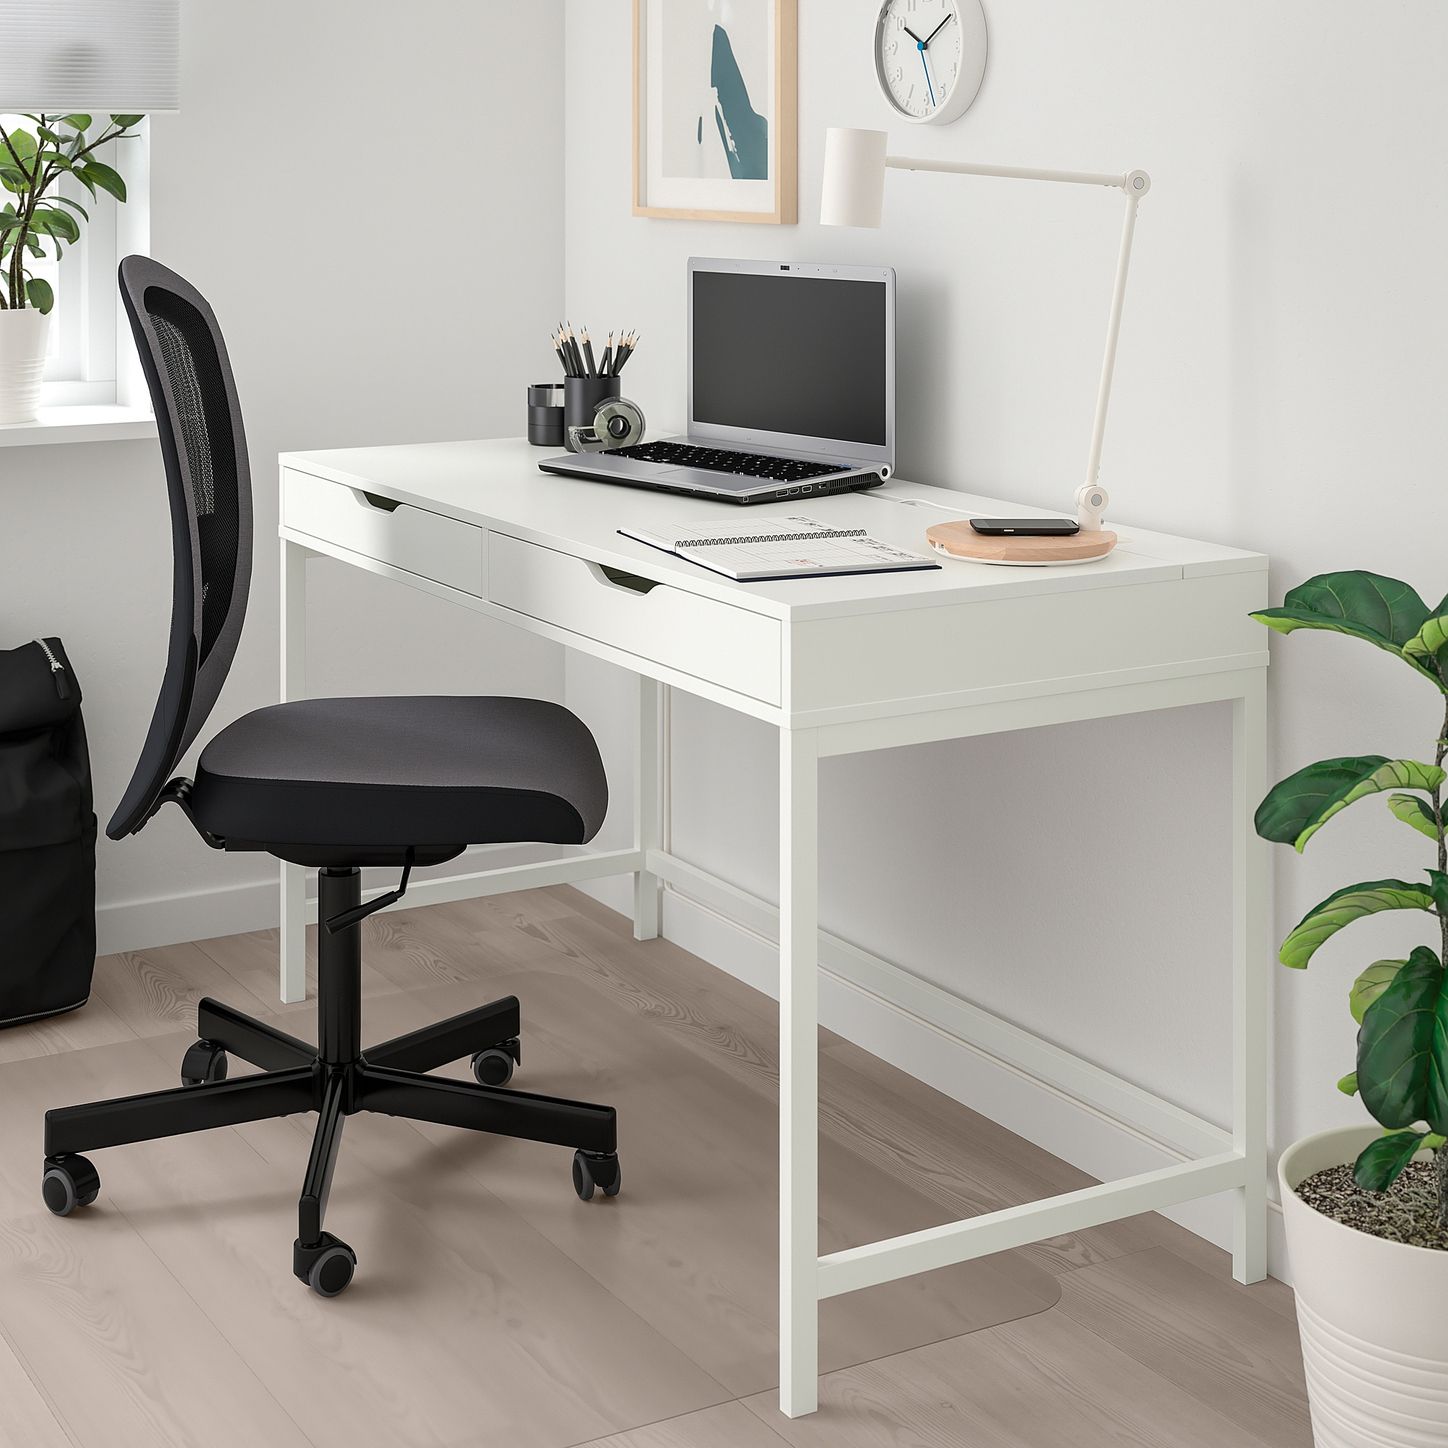 The Best Desks for Teenagers